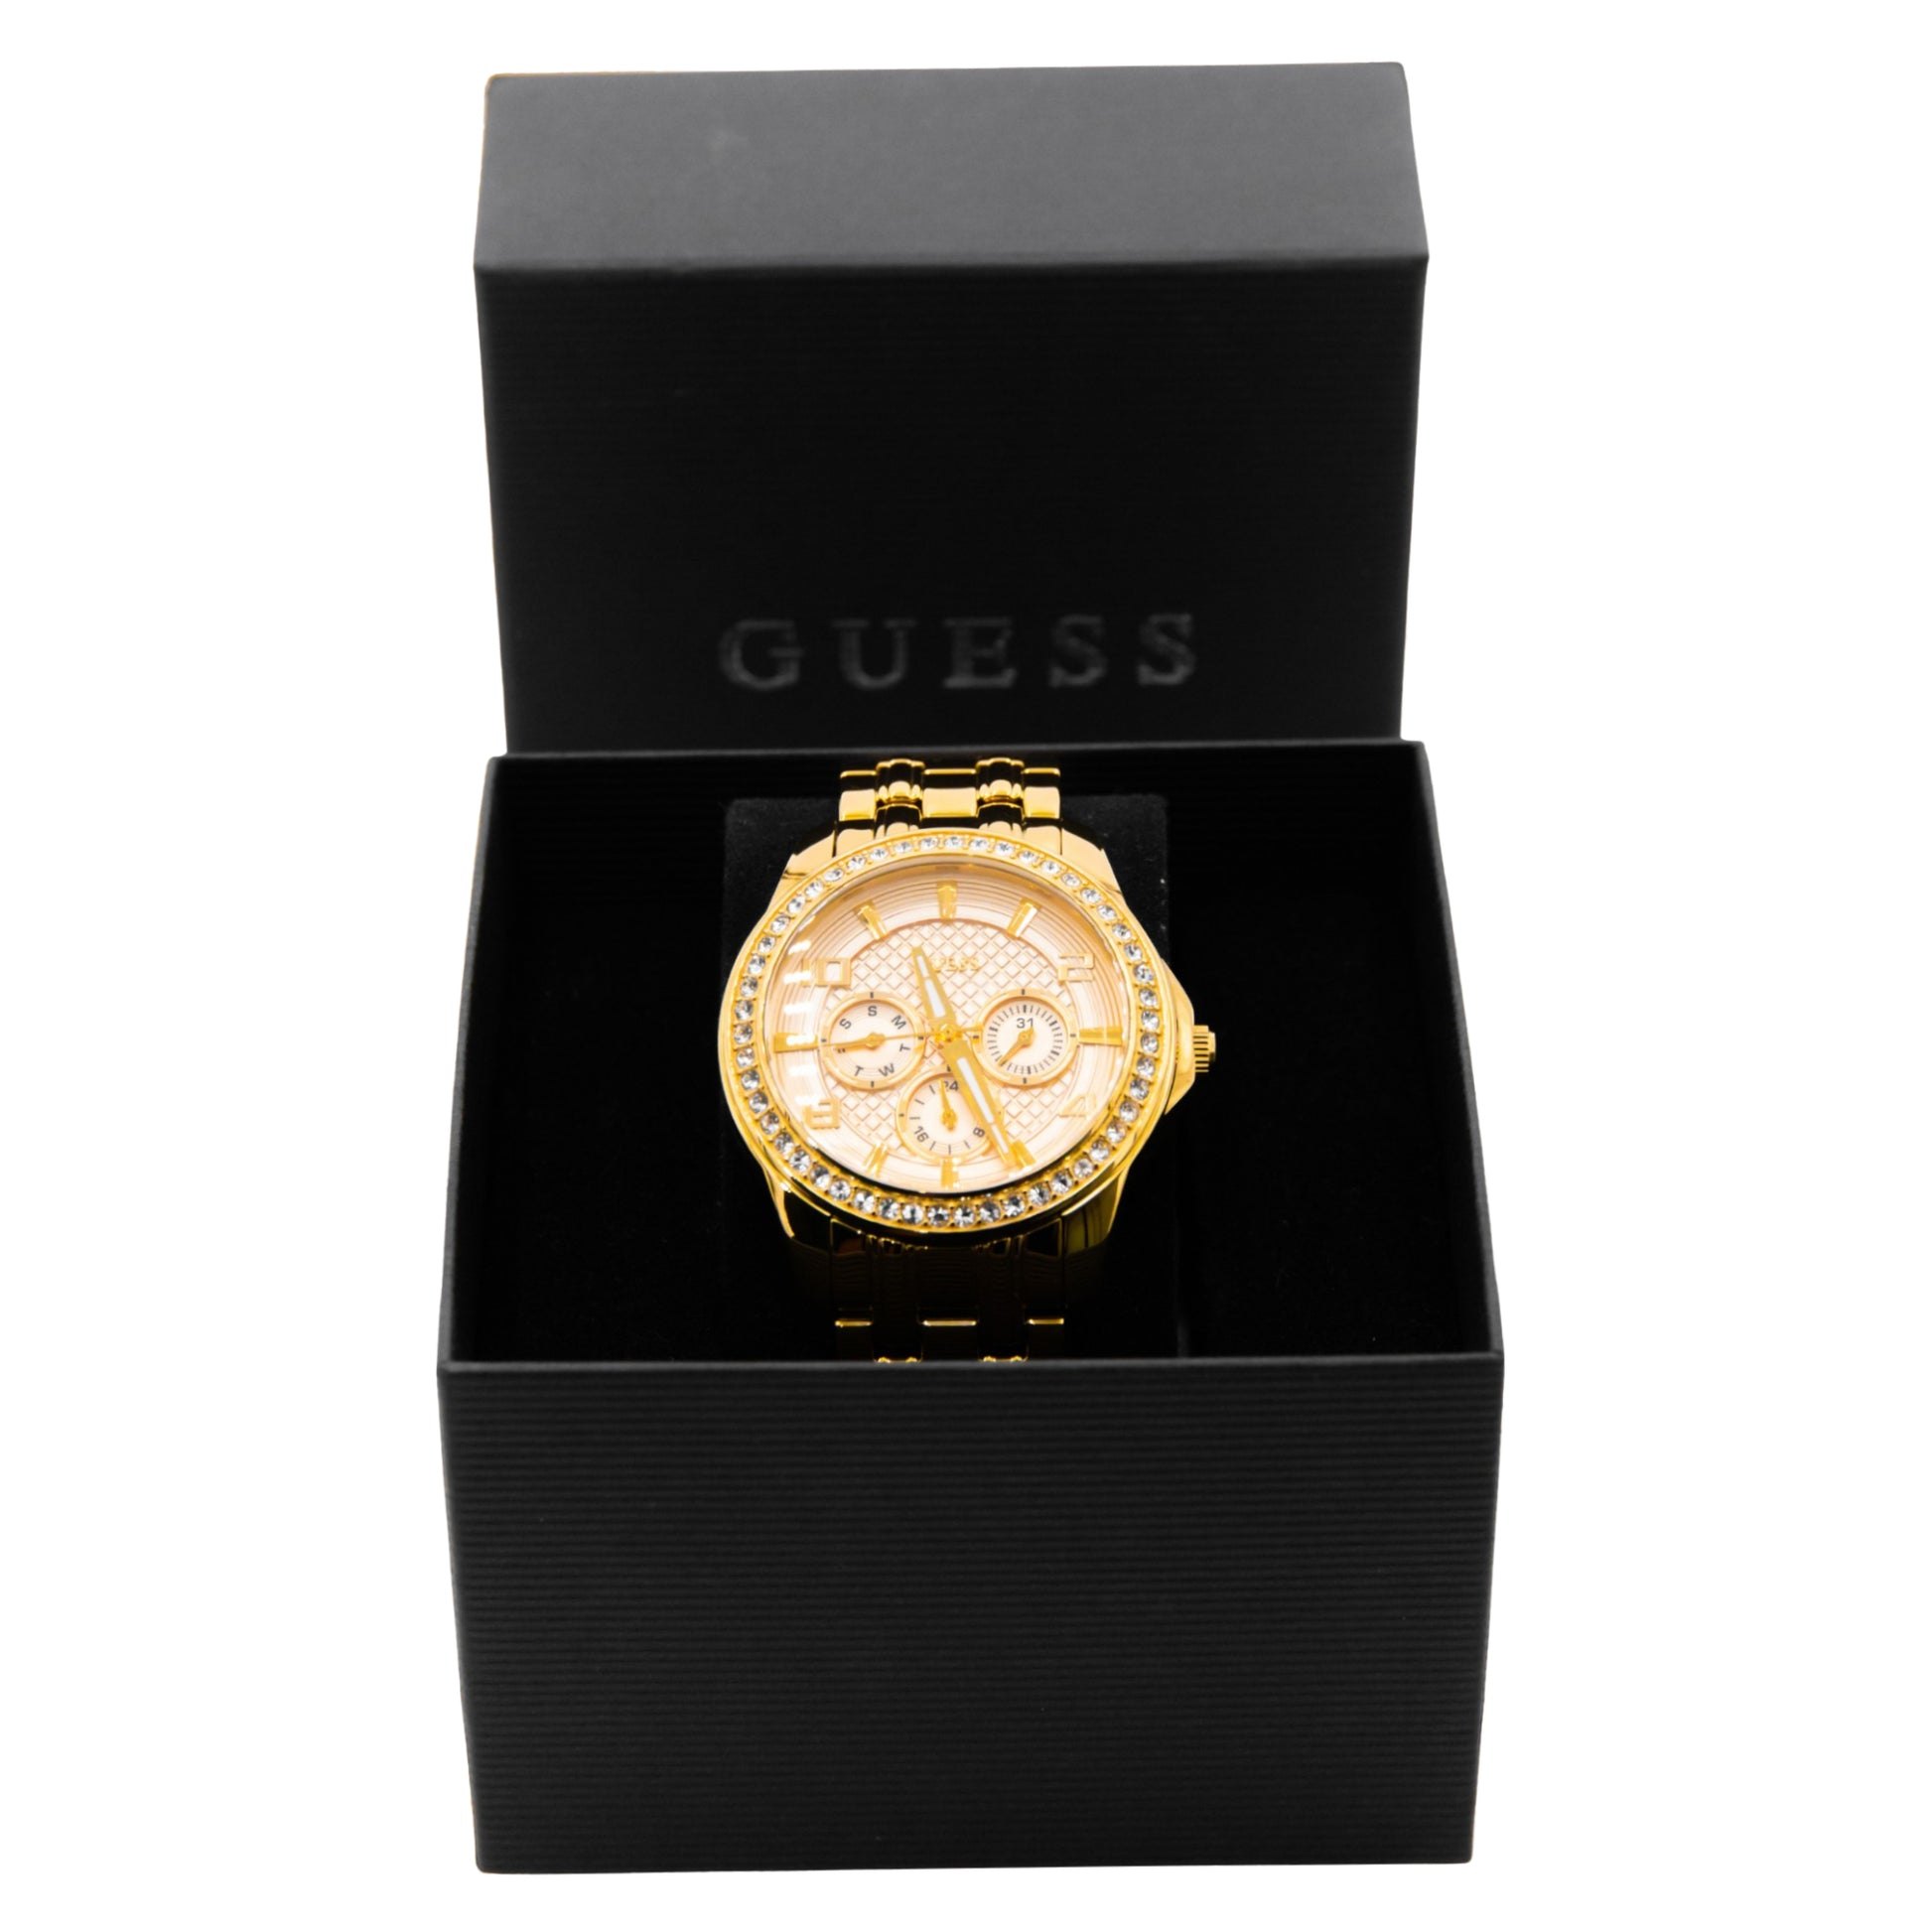 GUESS Women's Exec Multi Dial Crystal Watch - W0147L2 - 5904329824130